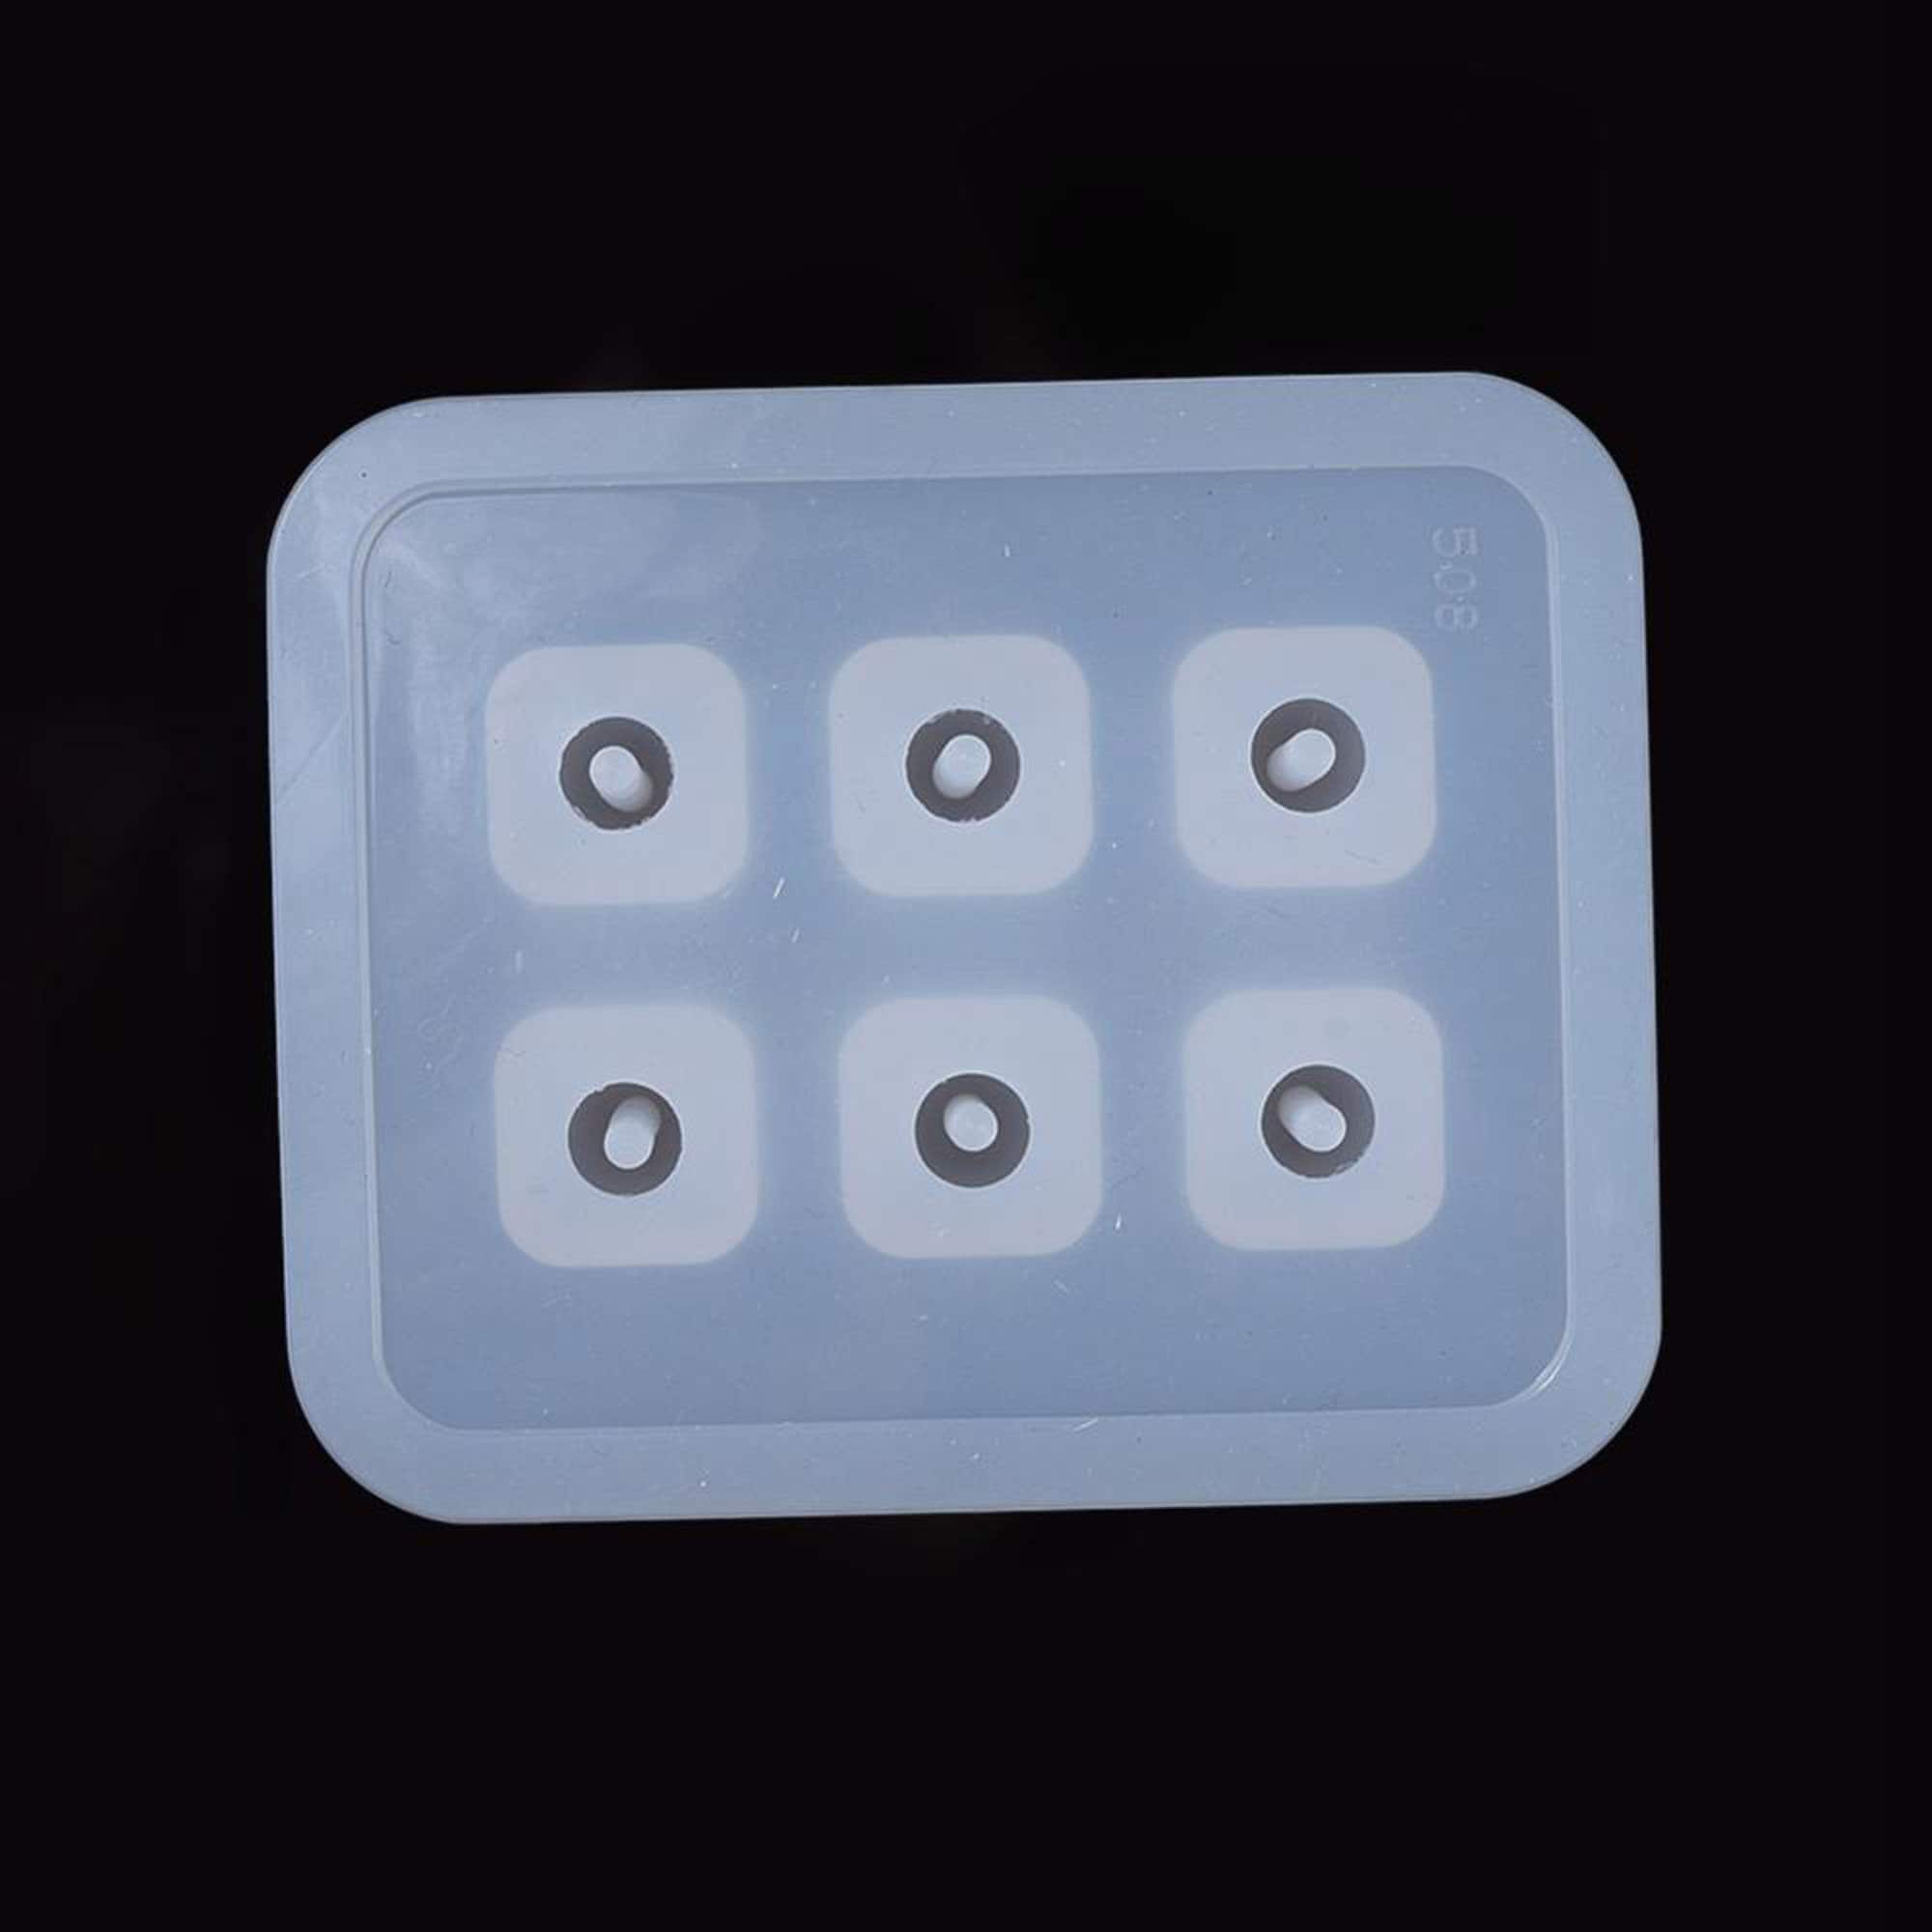 Dominos Silicone Mold, Dominoes Resin Mold, Domino Tile Mold Game